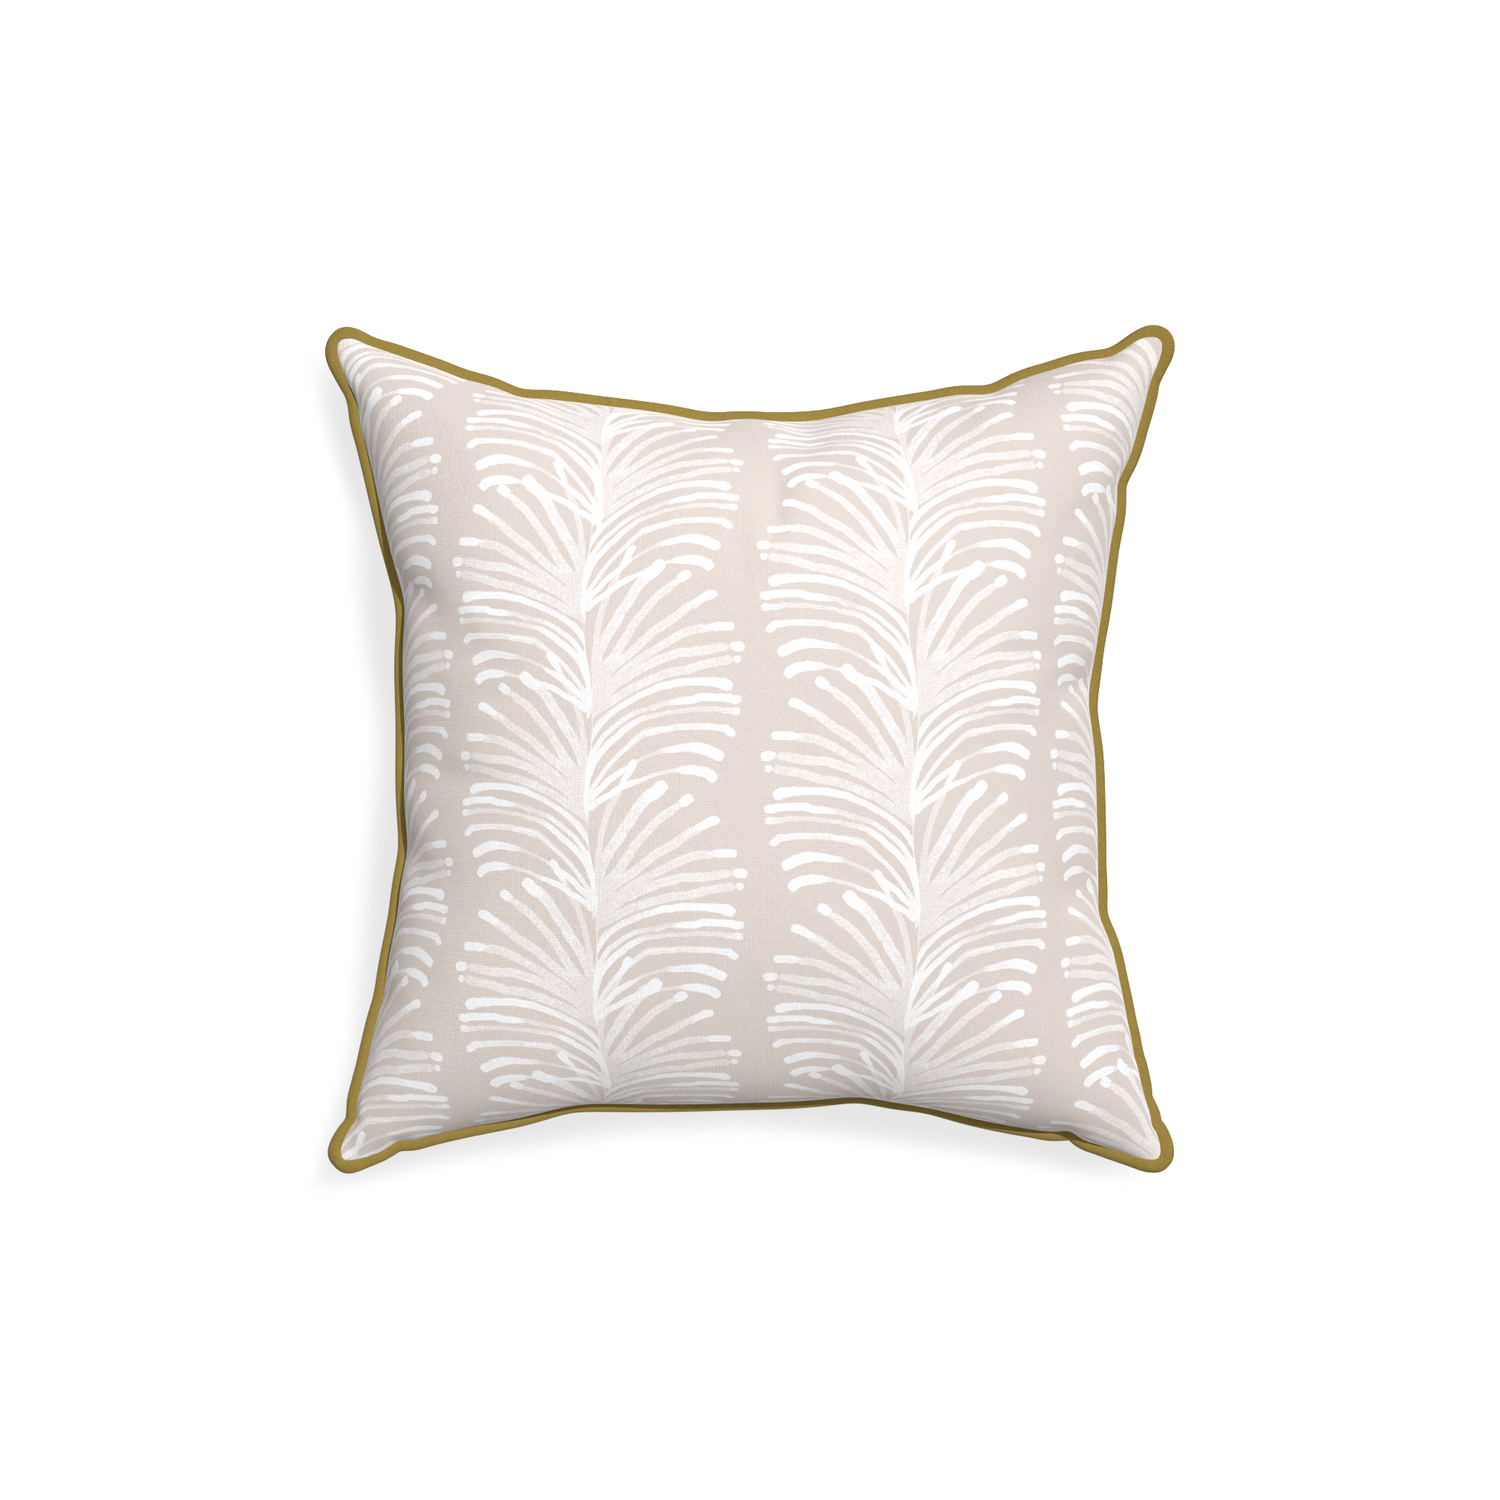 18-square emma sand custom sand colored botanical stripepillow with c piping on white background